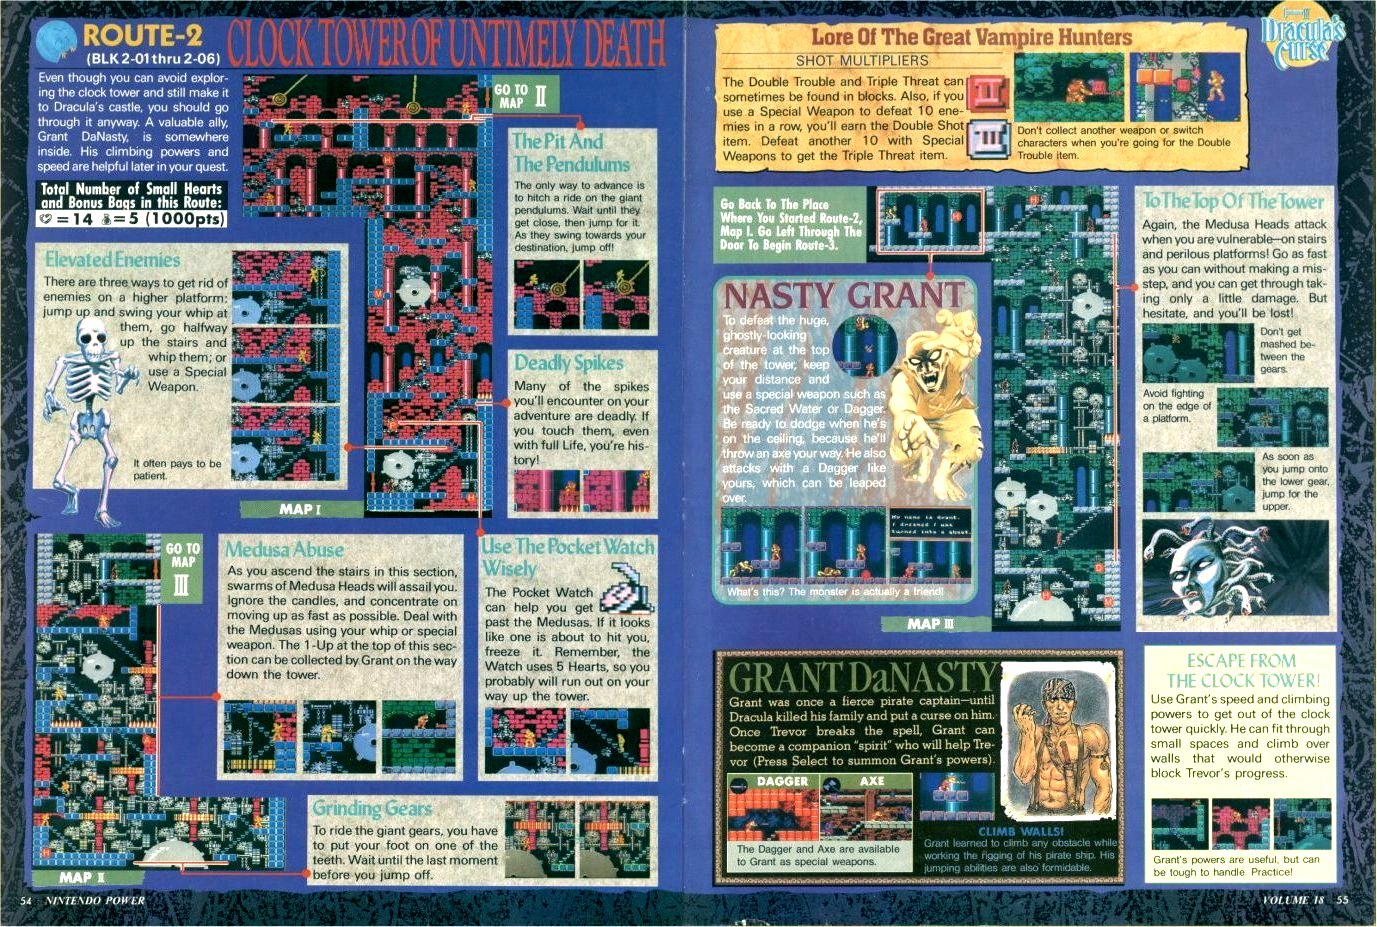 Read a user guide to castlevania.